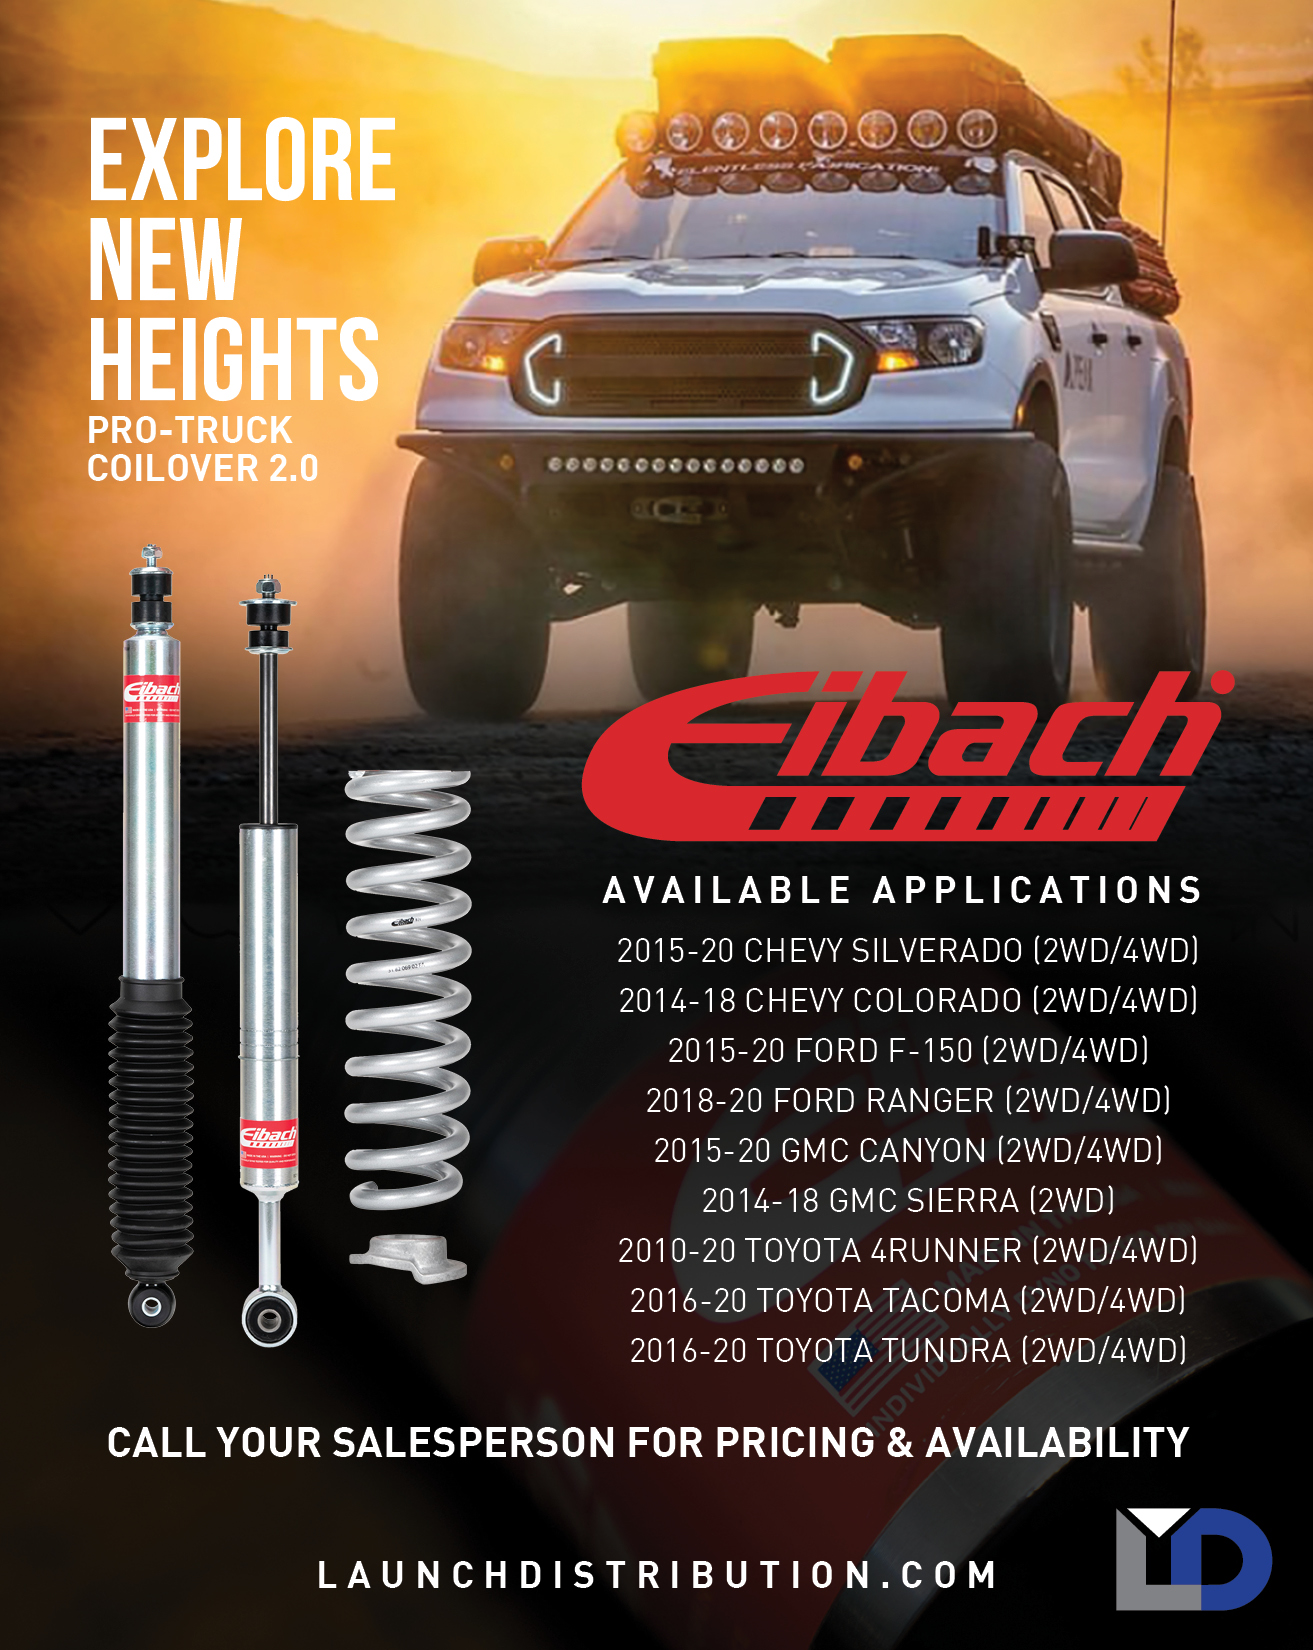 Explore New Heights with the Eibach Pro-Truck Coilover Kits 2.0